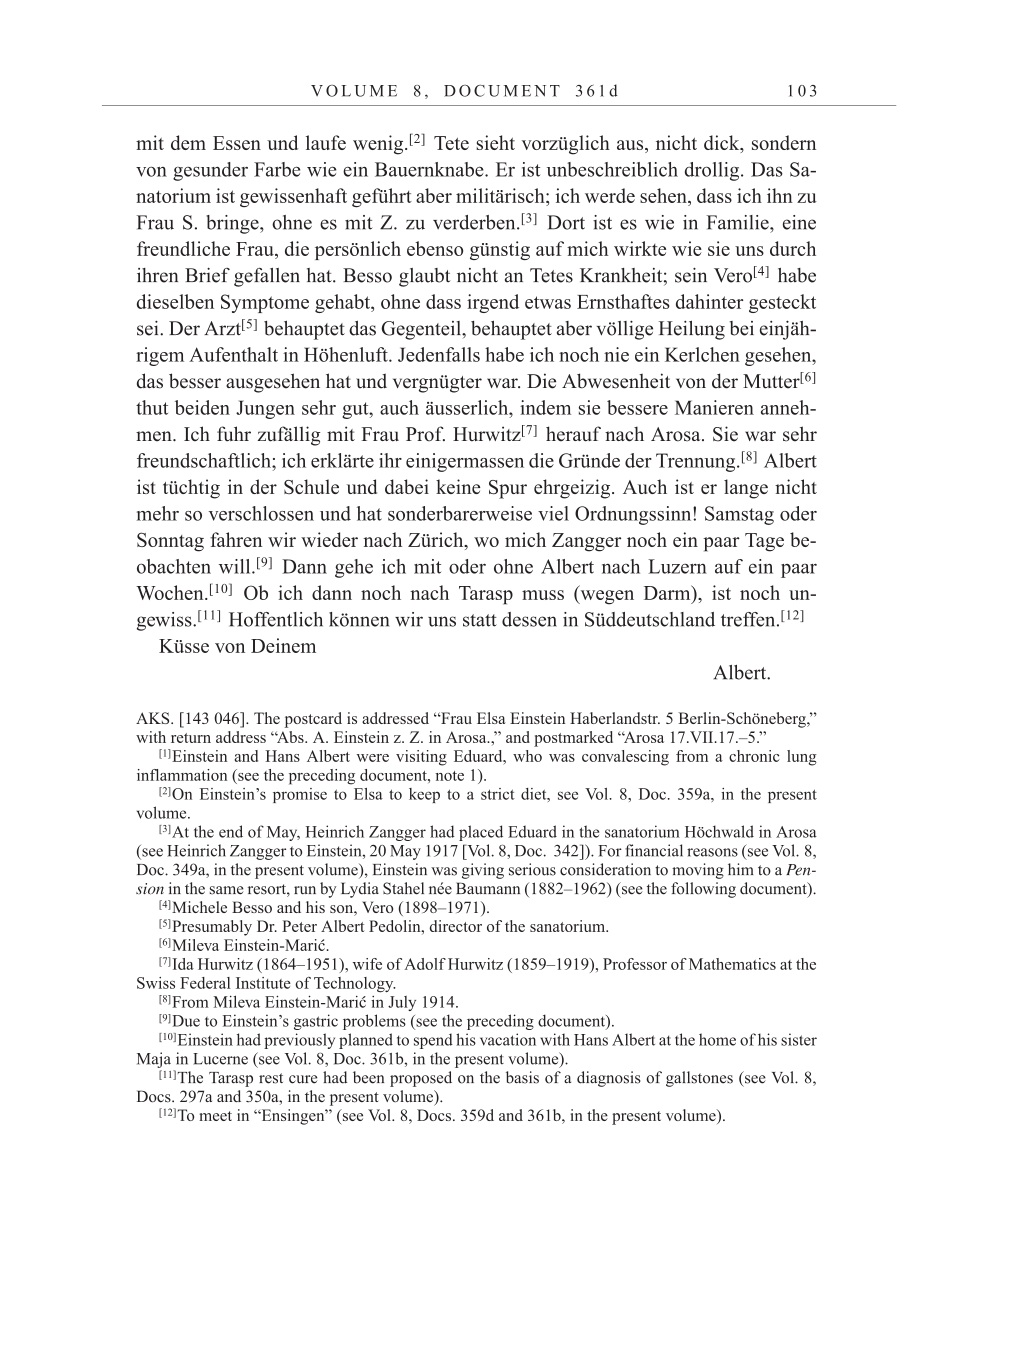 Volume 10: The Berlin Years: Correspondence May-December 1920 / Supplementary Correspondence 1909-1920 page 103